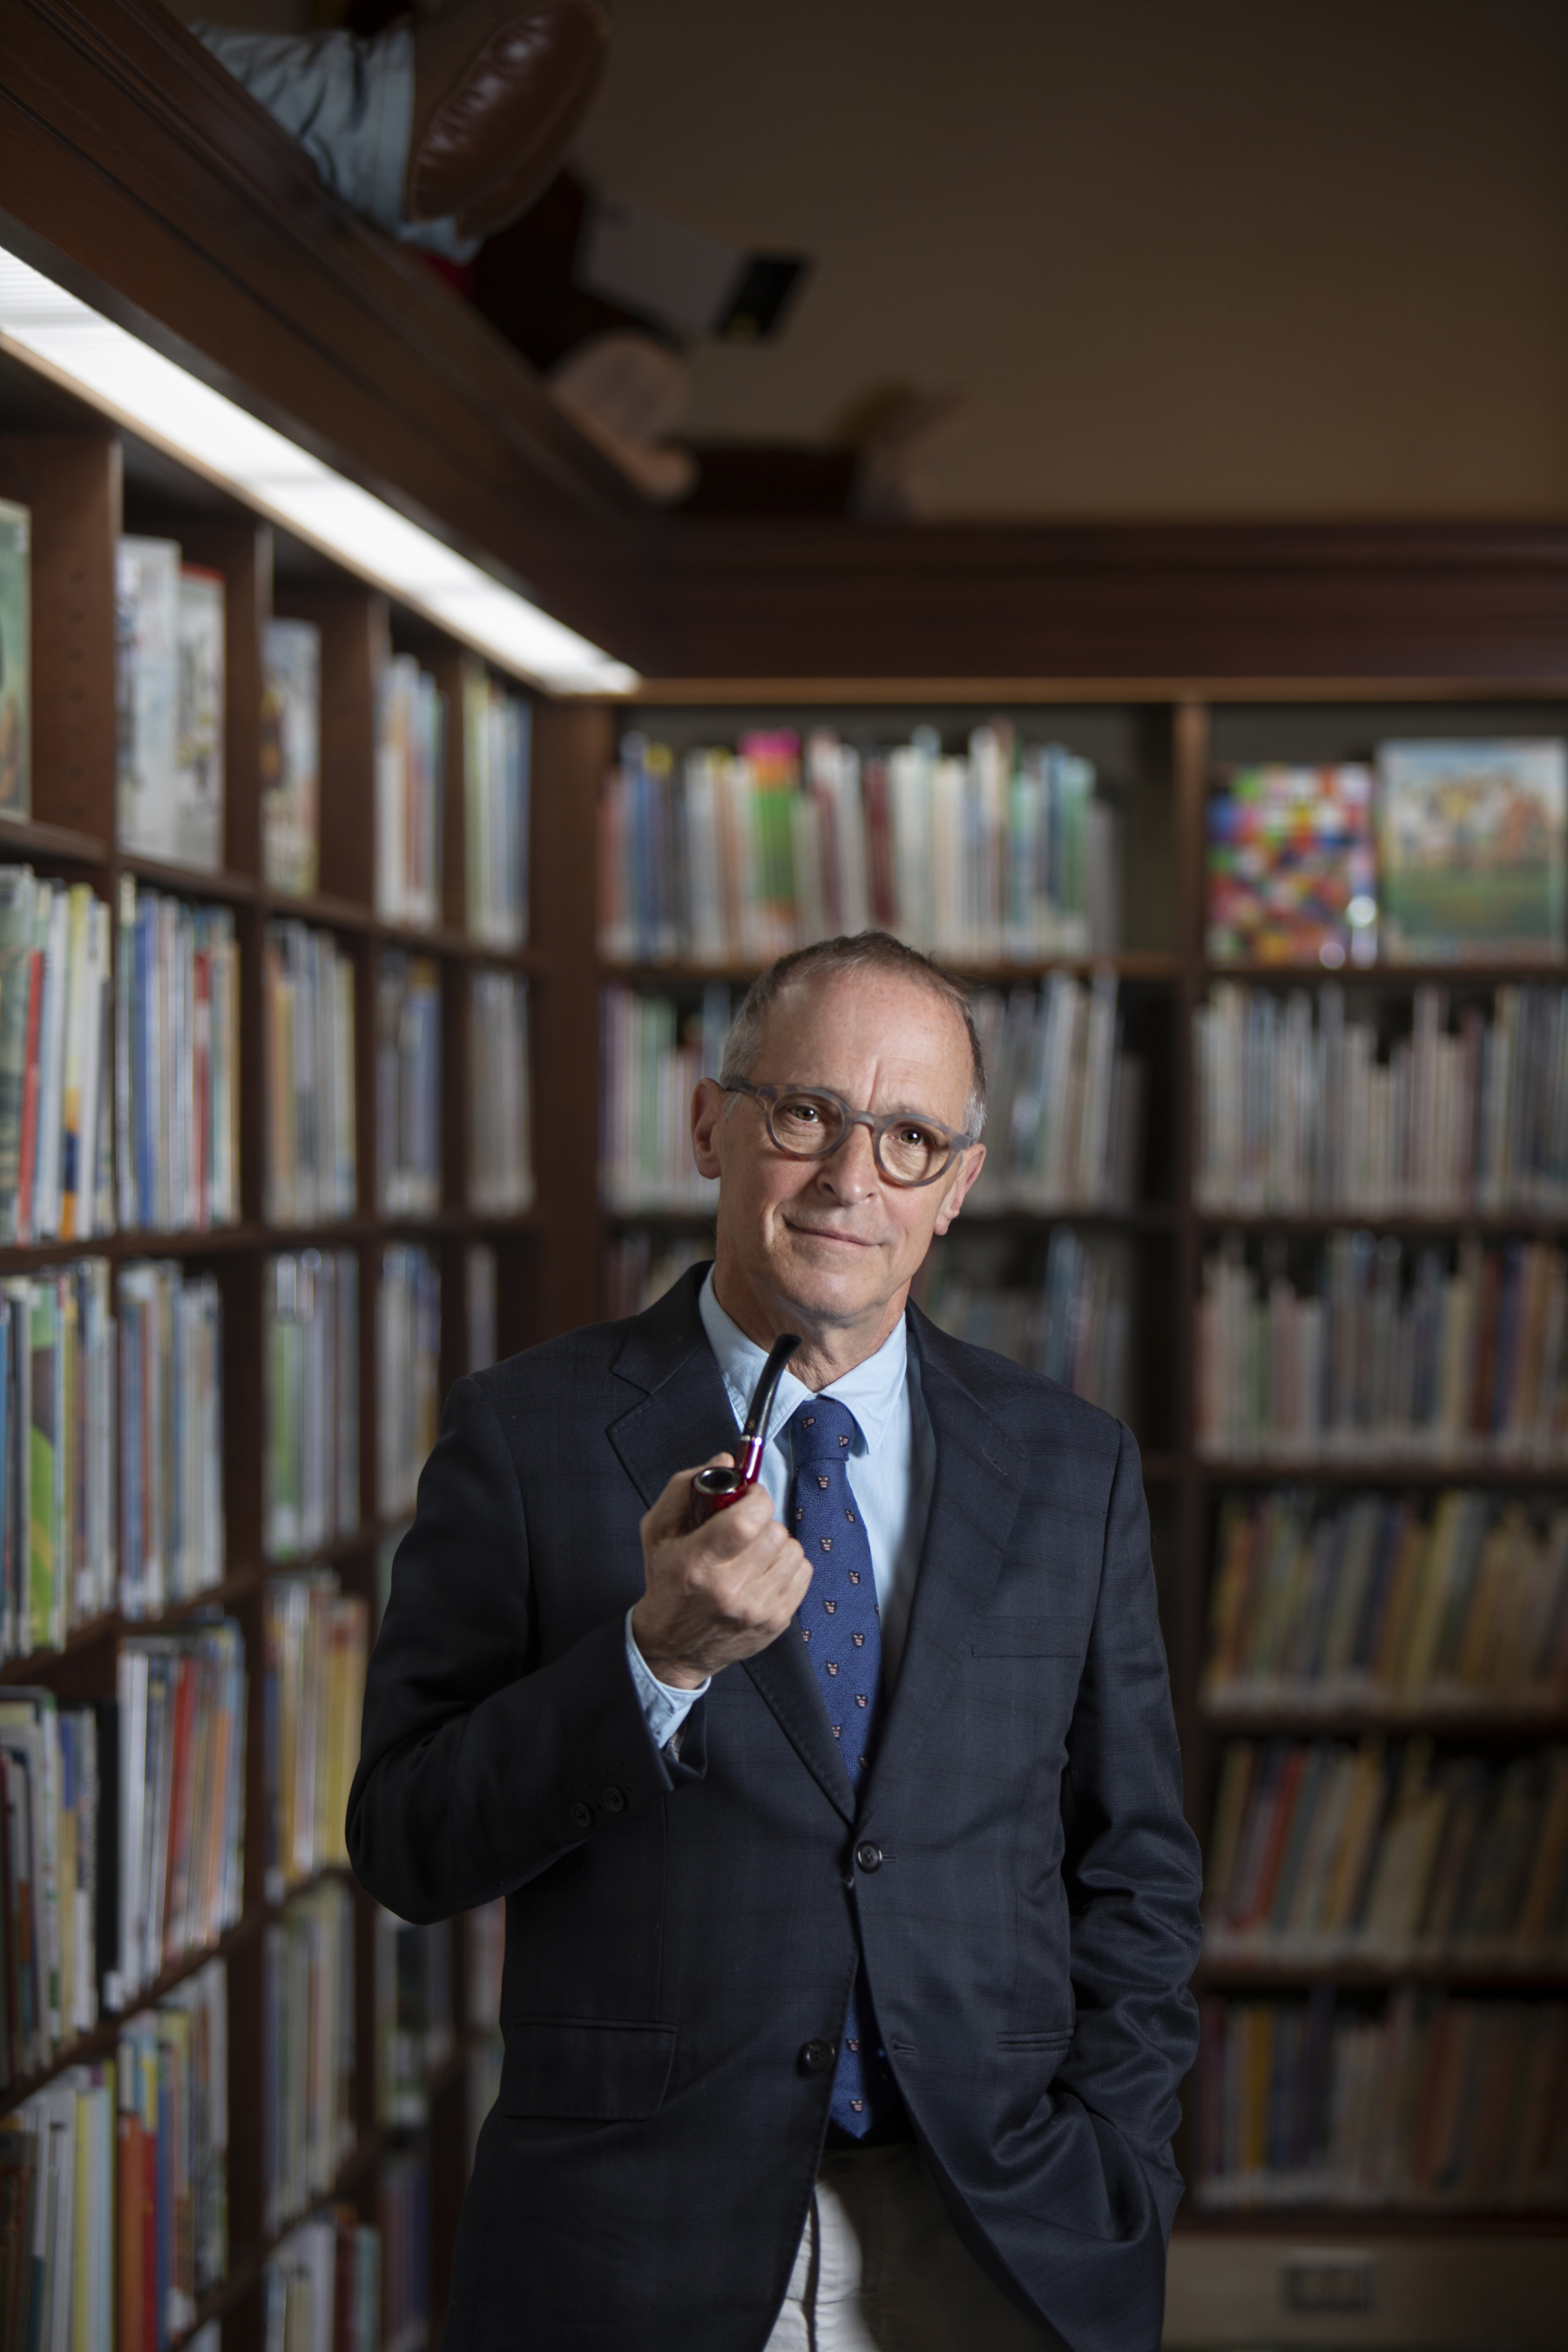 David Sedaris in a suite holding a pipe in a library.